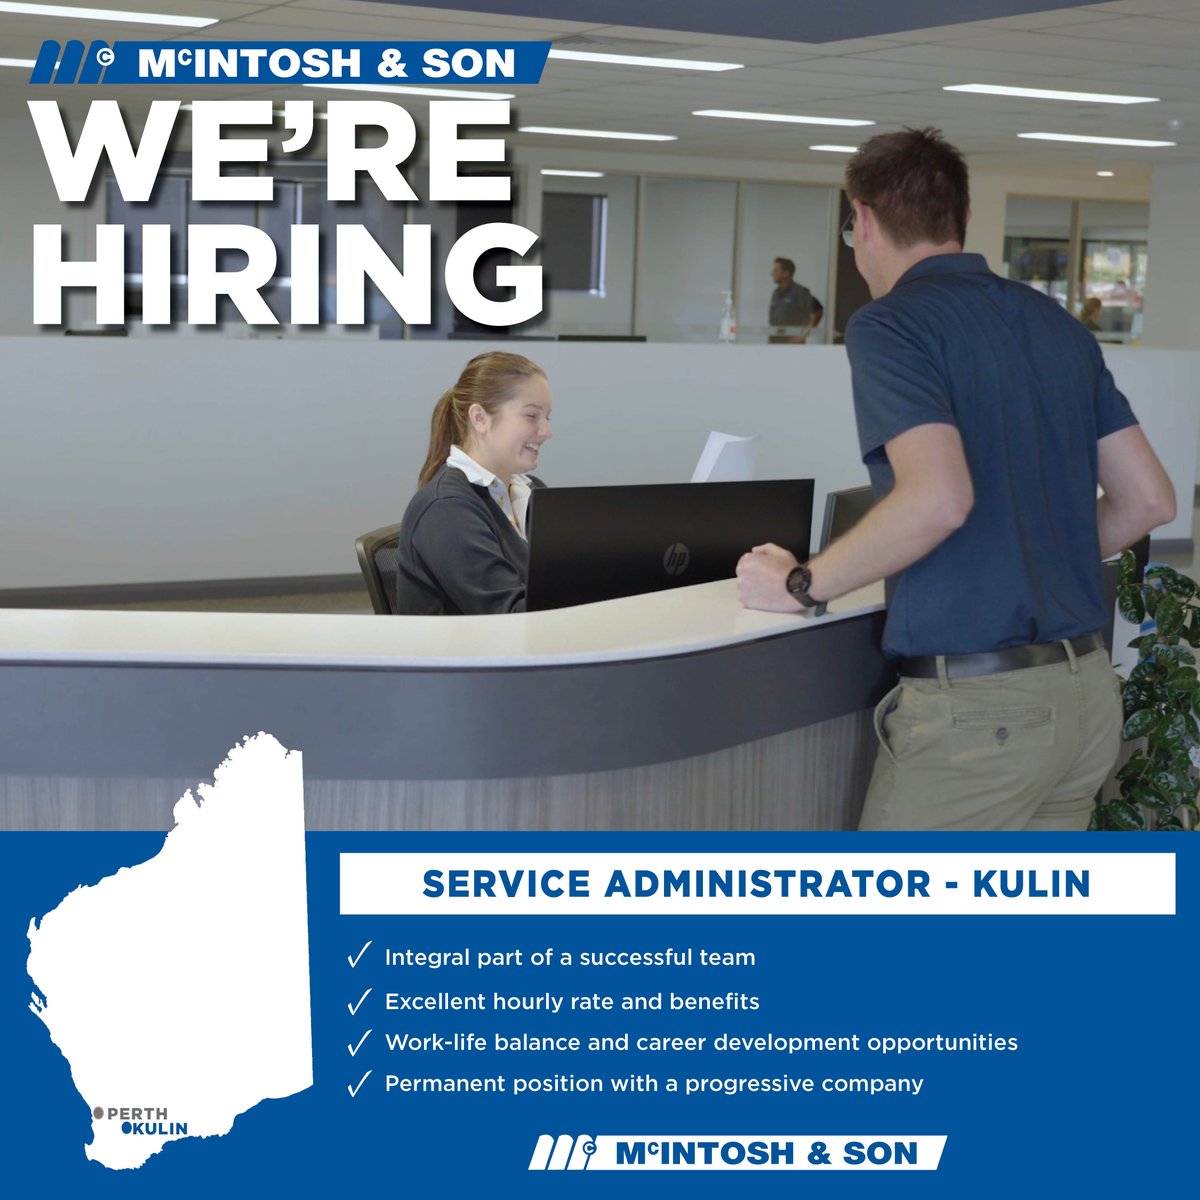 McIntosh & Son have an amazing opportunity for a motivated individual to deliver exceptional administrative support to our Kulin Service team on a full-time basis - for more info, apply here 👉🏻 loom.ly/zkYZbwI